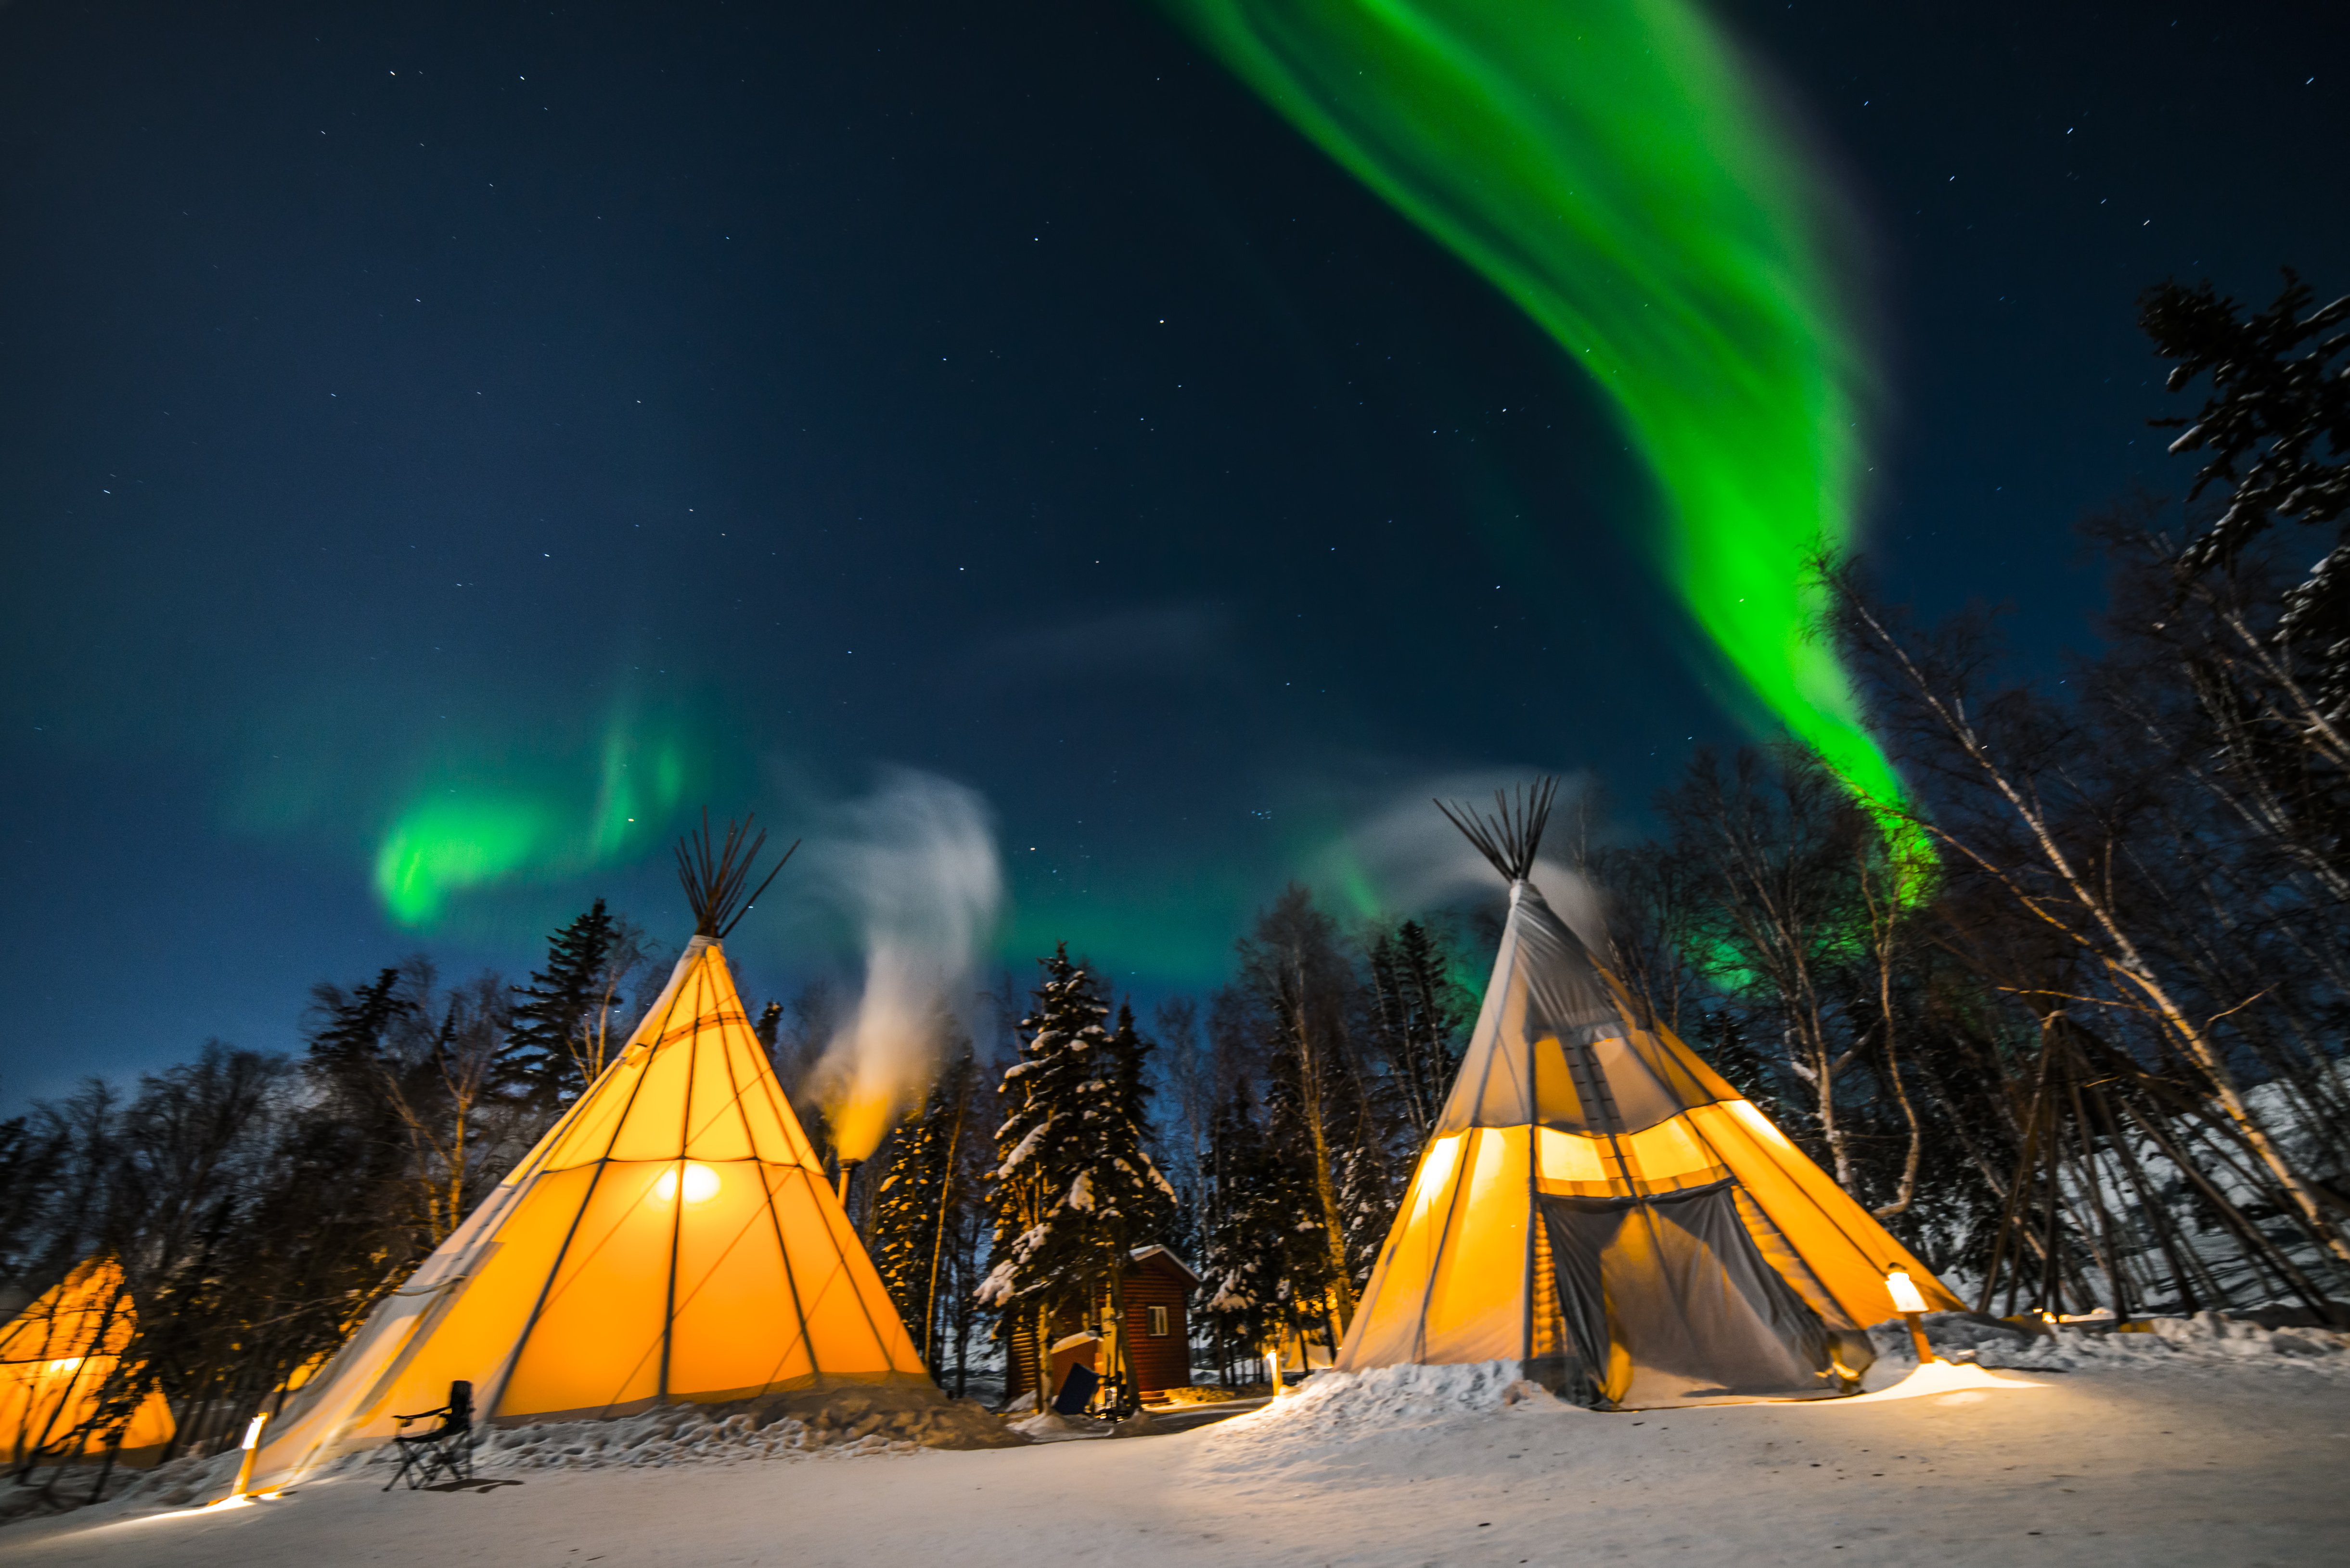 Aurora Village teepees with green aurora in the night sky in Yellowknife, NT. 